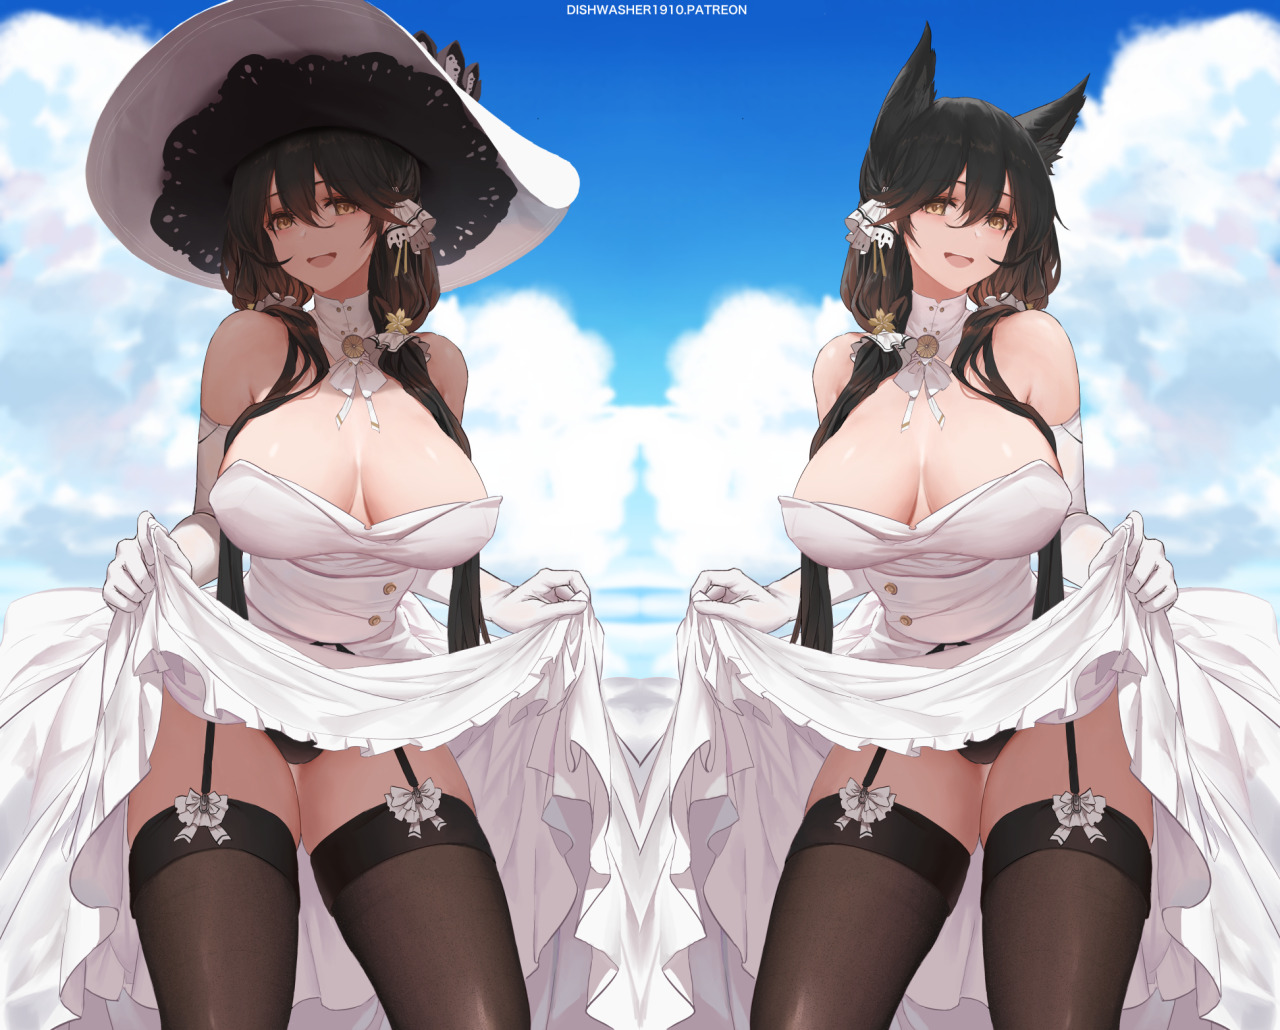 HMS Atago - ロイヤル愛宕#AzurLane  #アズールレーンHD images , NSFW versions , PSD file available on : 
Patreon : https://www.patreon.com/posts/37773256
Fanbox : https://dishwasher1910.fanbox.cc/posts/1099926
Gumroad : https://gum.co/ARbeju #azurlane